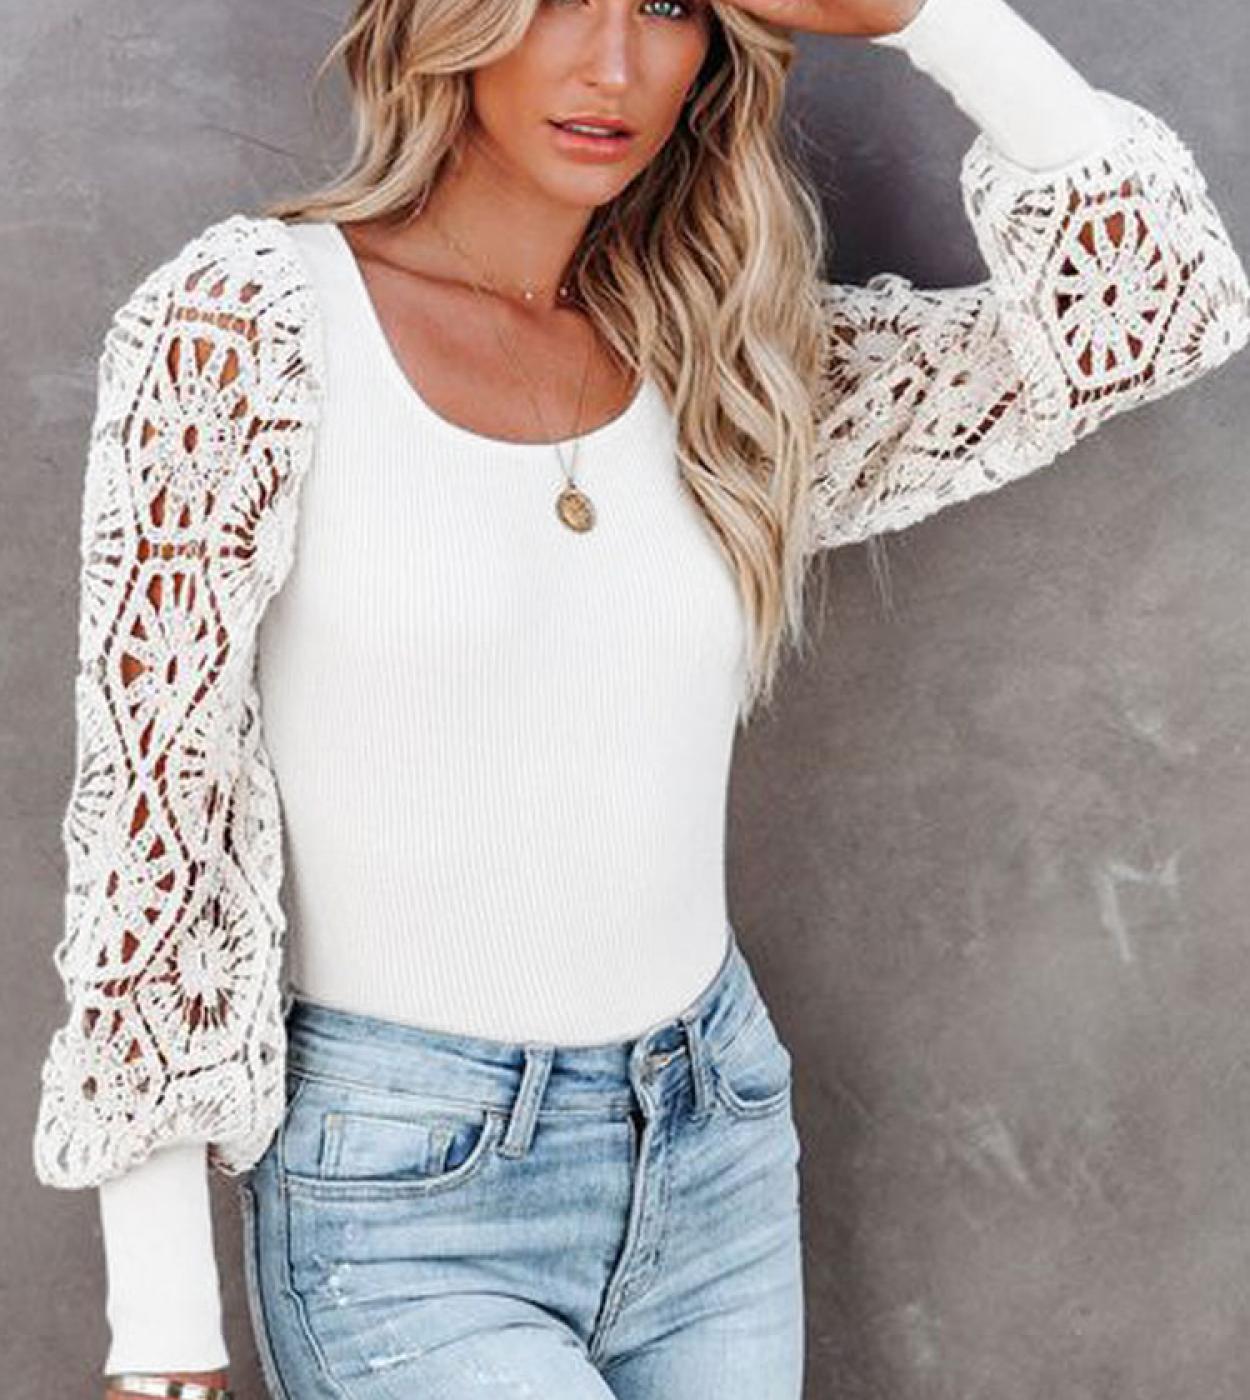 Elegant Fashion Lace Long Sleeve Pullover Women Tshirt Autumn Hollow Out White Y2k Tops Casual O Neck Vintage Tee Shirts